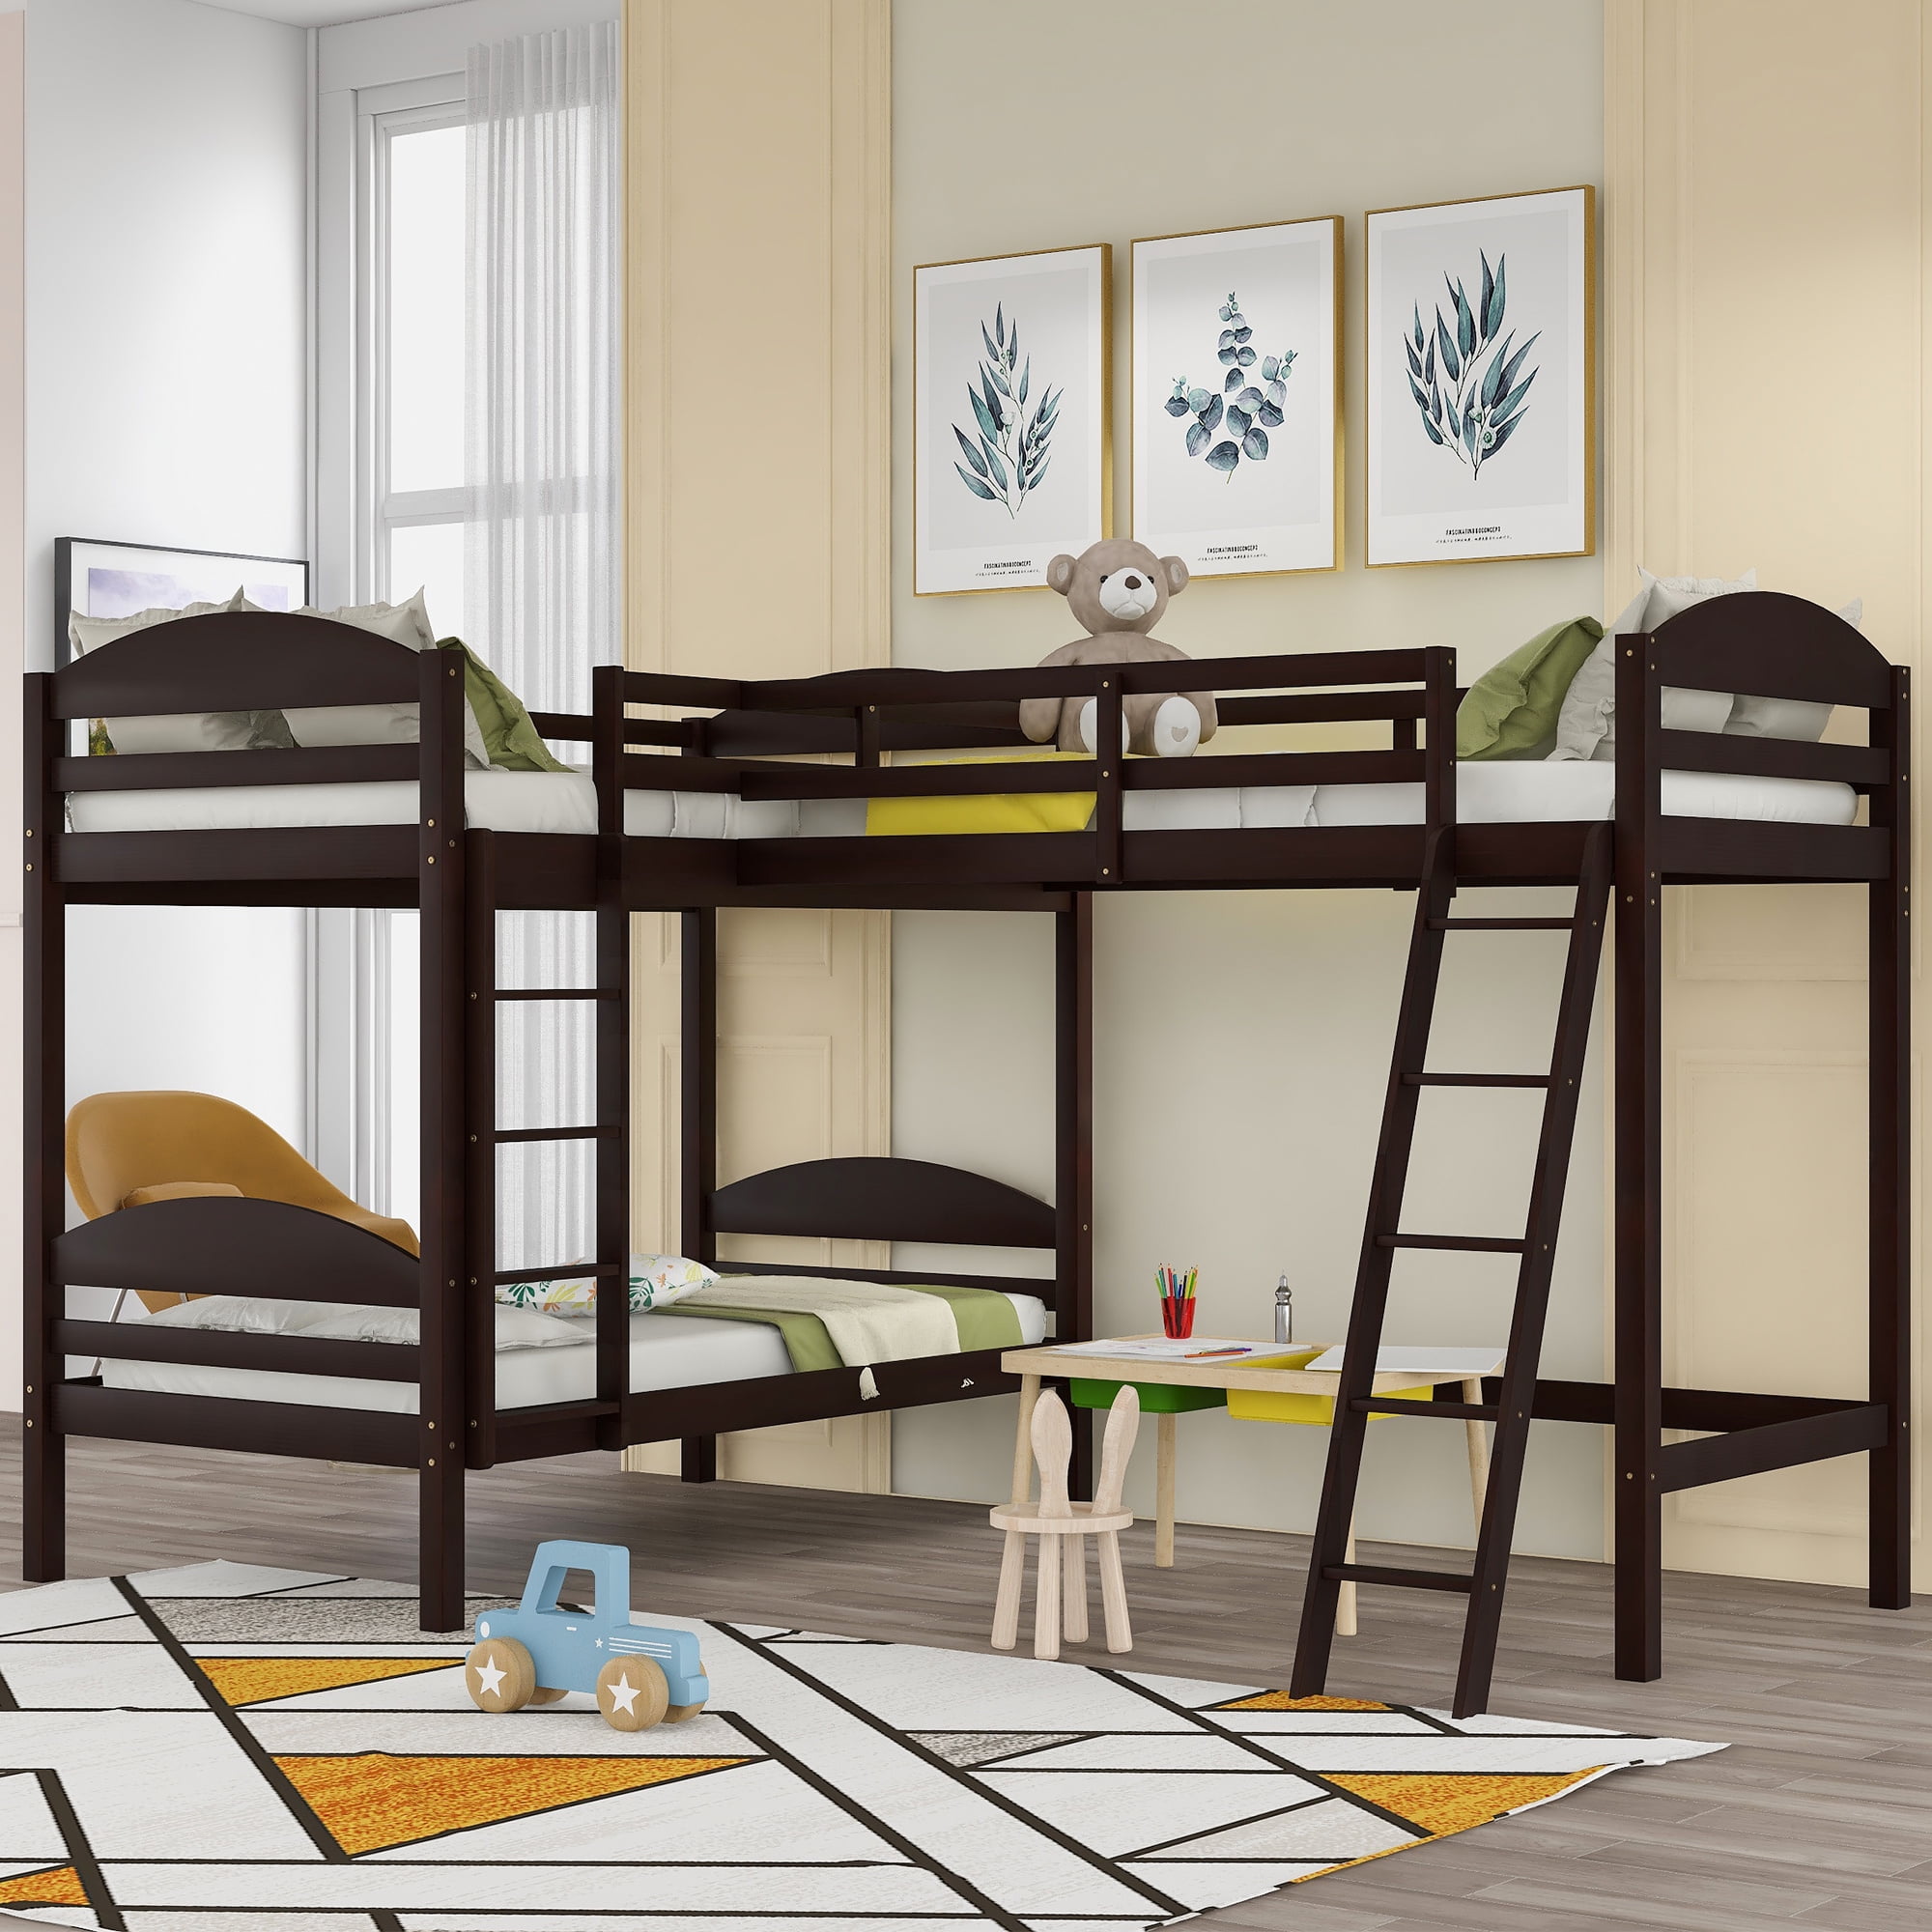 Twin Over Bunk Beds For Kids, Corner Bunk Beds With Desk